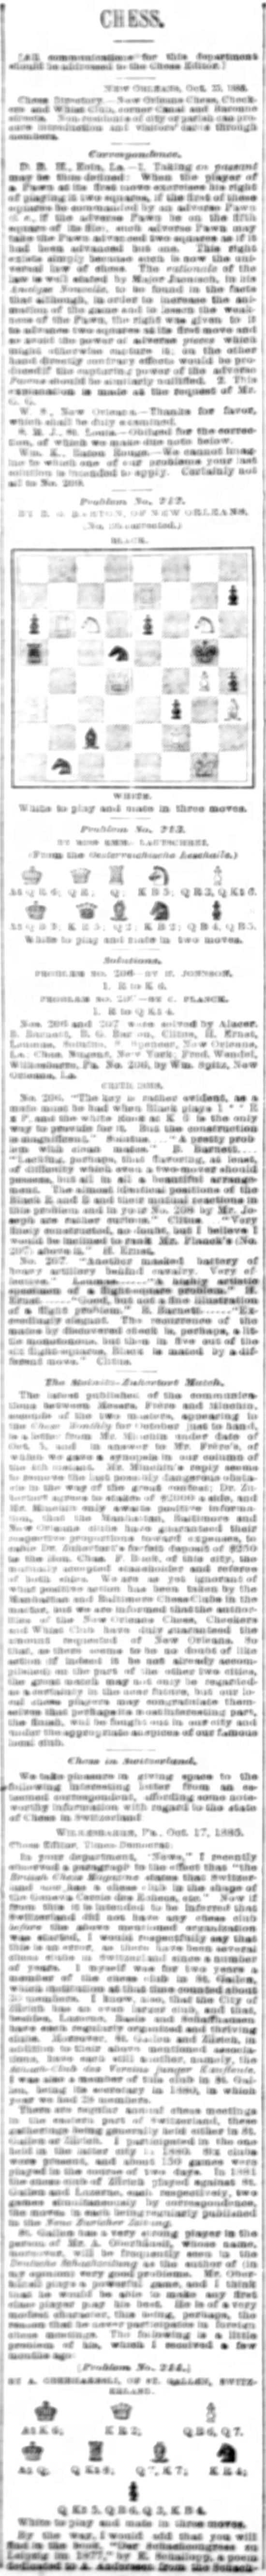 1885.10.25-01 New Orleans Times-Democrat.png